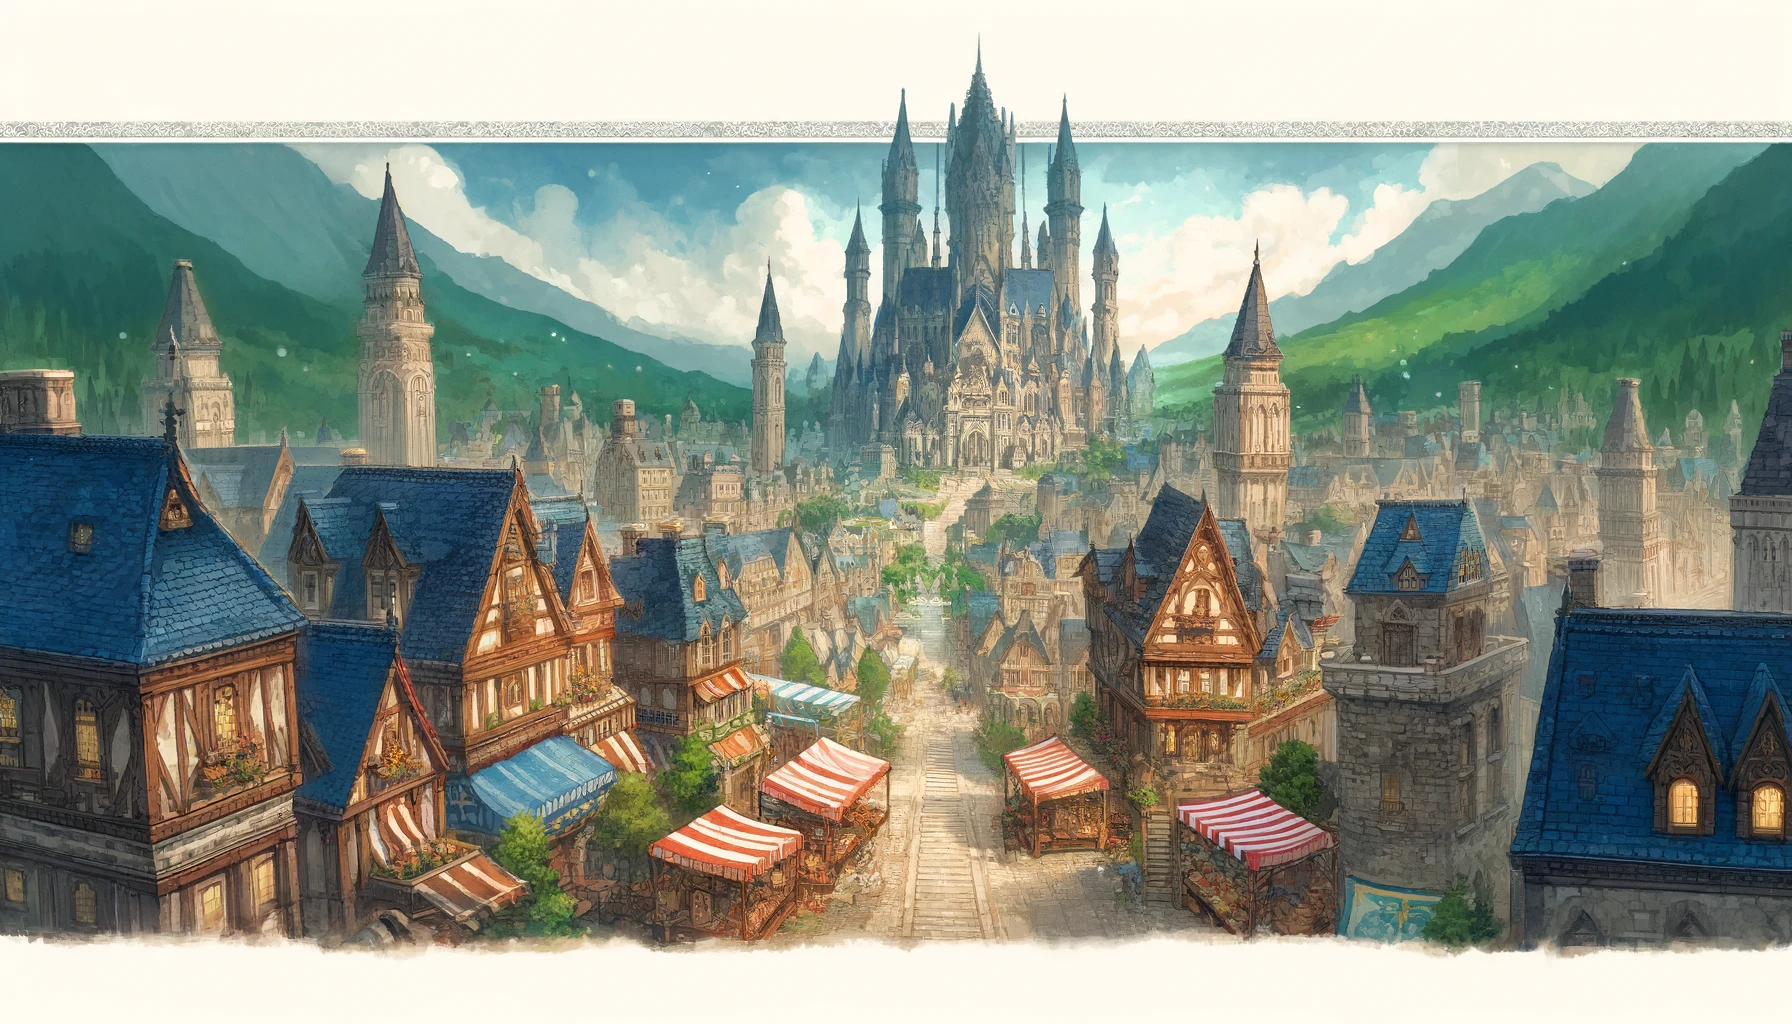 DALL-E-2024-04-15-20-46-48-A-wide-horizontal-banner-depicting-a-fantasy-medieval-city-in-an-anime-wa.webp